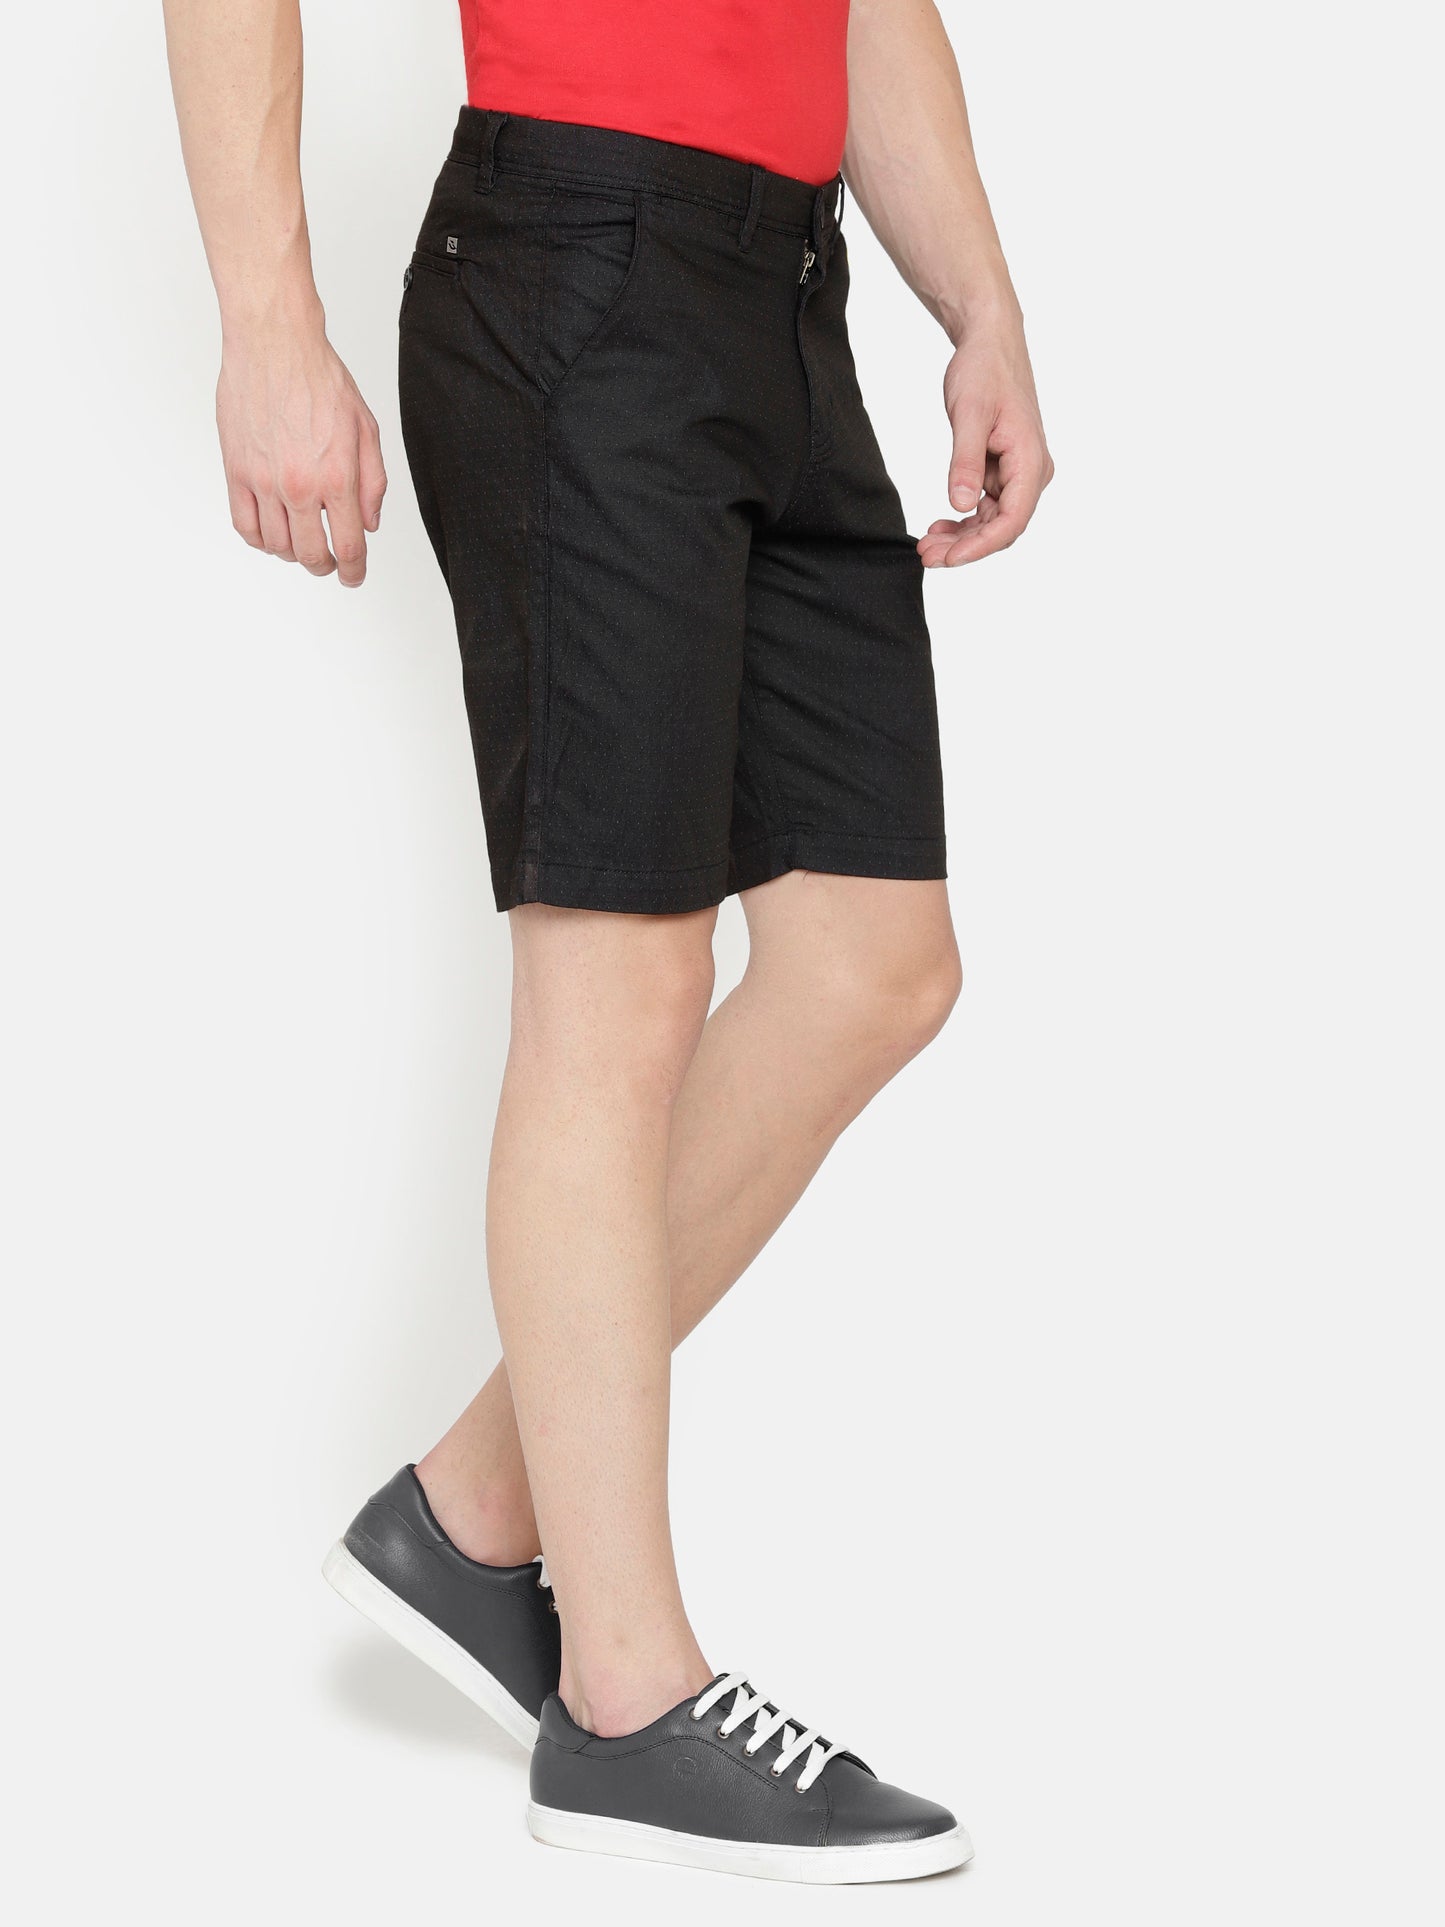 Casual Shorts in black color